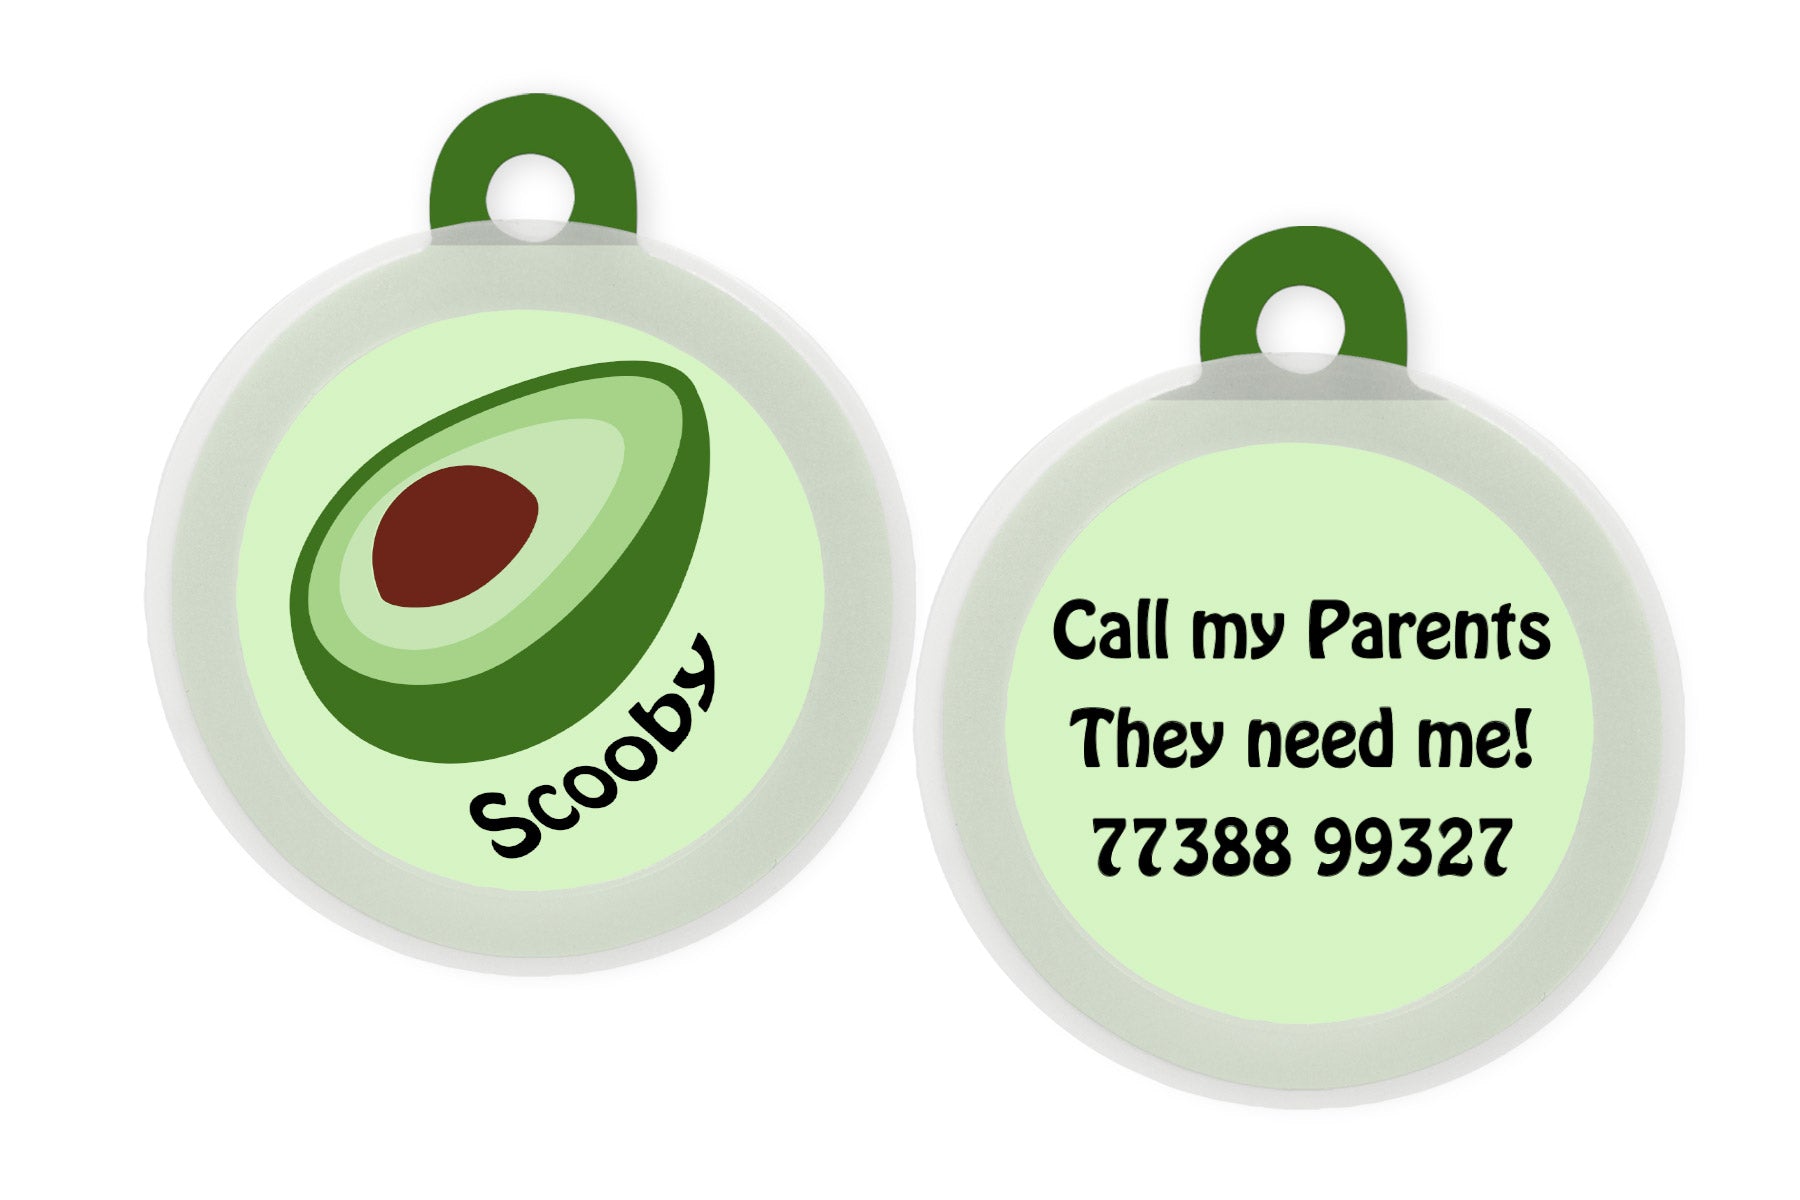 Customized Dog Tags Summer Exclusives - Avocado